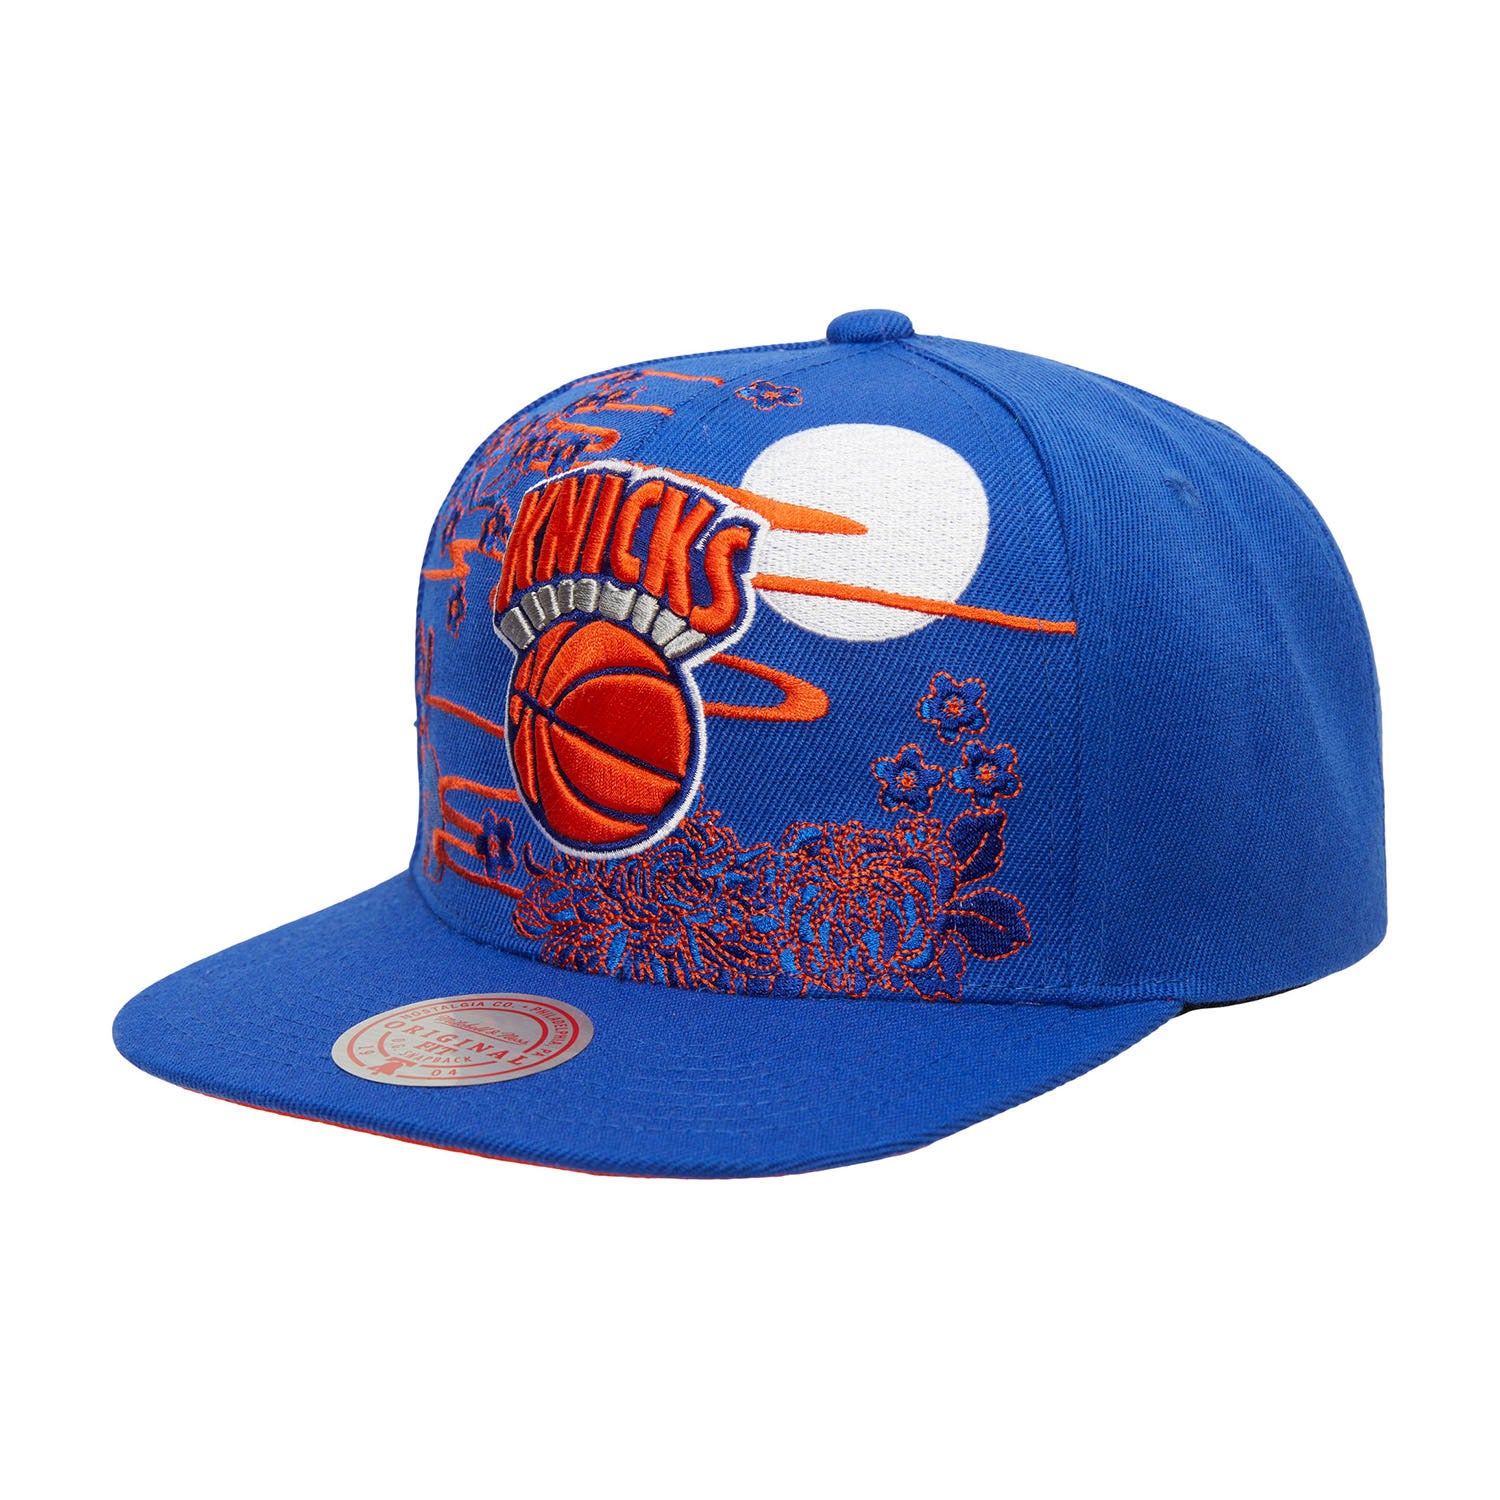 Mitchell & Ness Knicks Lunar New Year Snapback Hat In Blue, Orange & White - Angled Left Front View